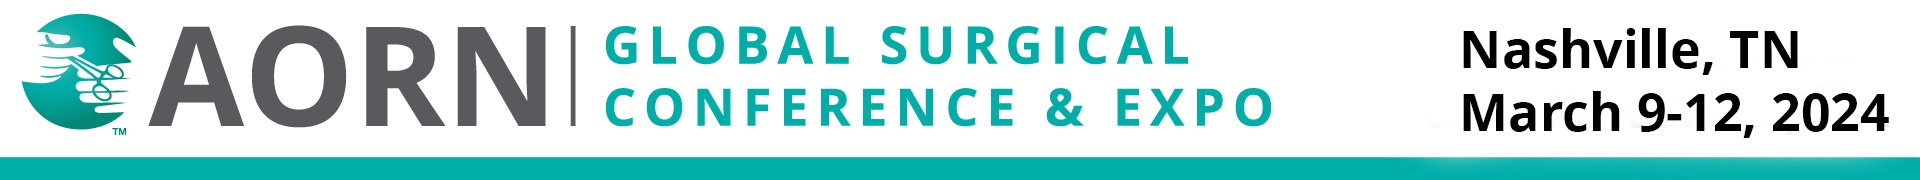 2024 AORN Global Surgical Conference Event Banner